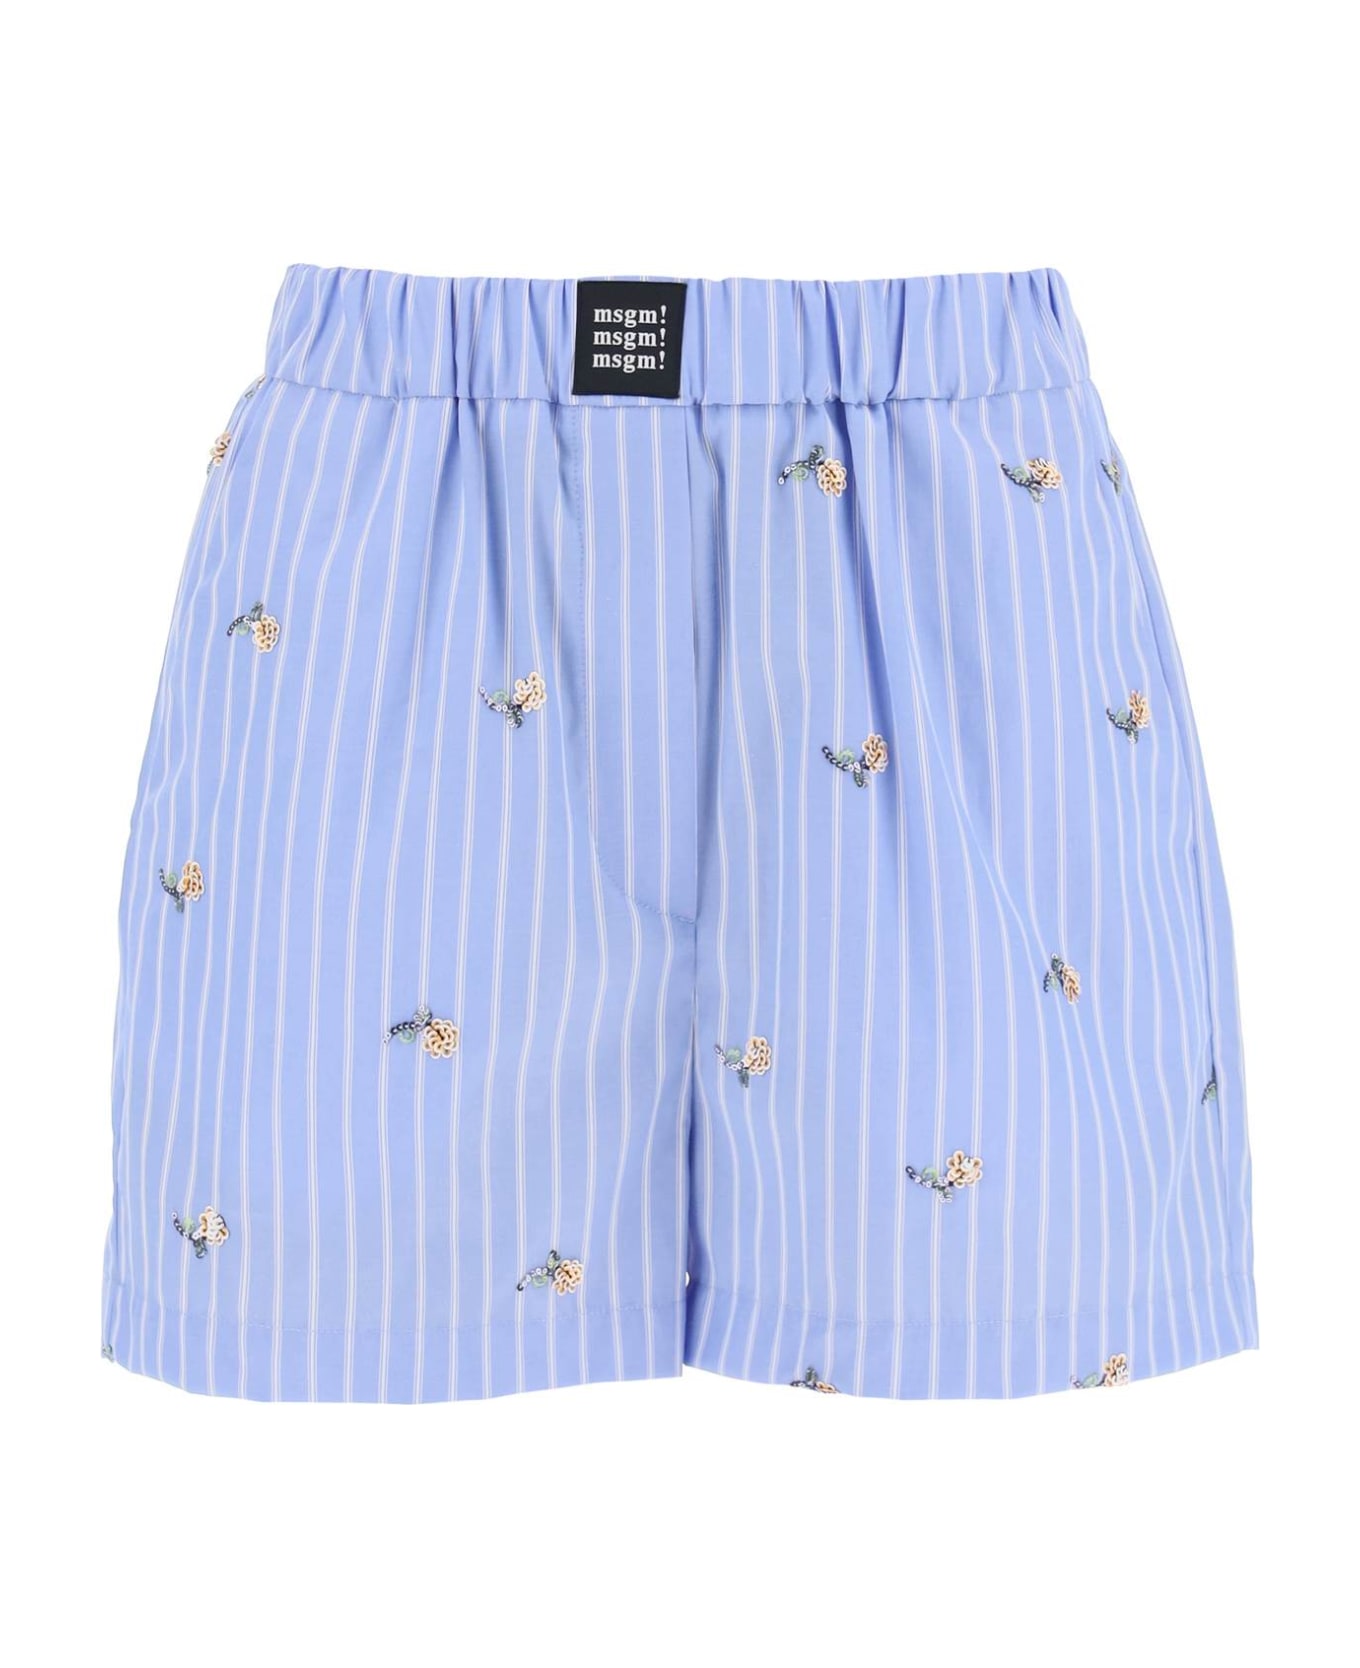 MSGM Striped Poplin Shorts With Sequin Flowers - LIGHT BLUE (White)